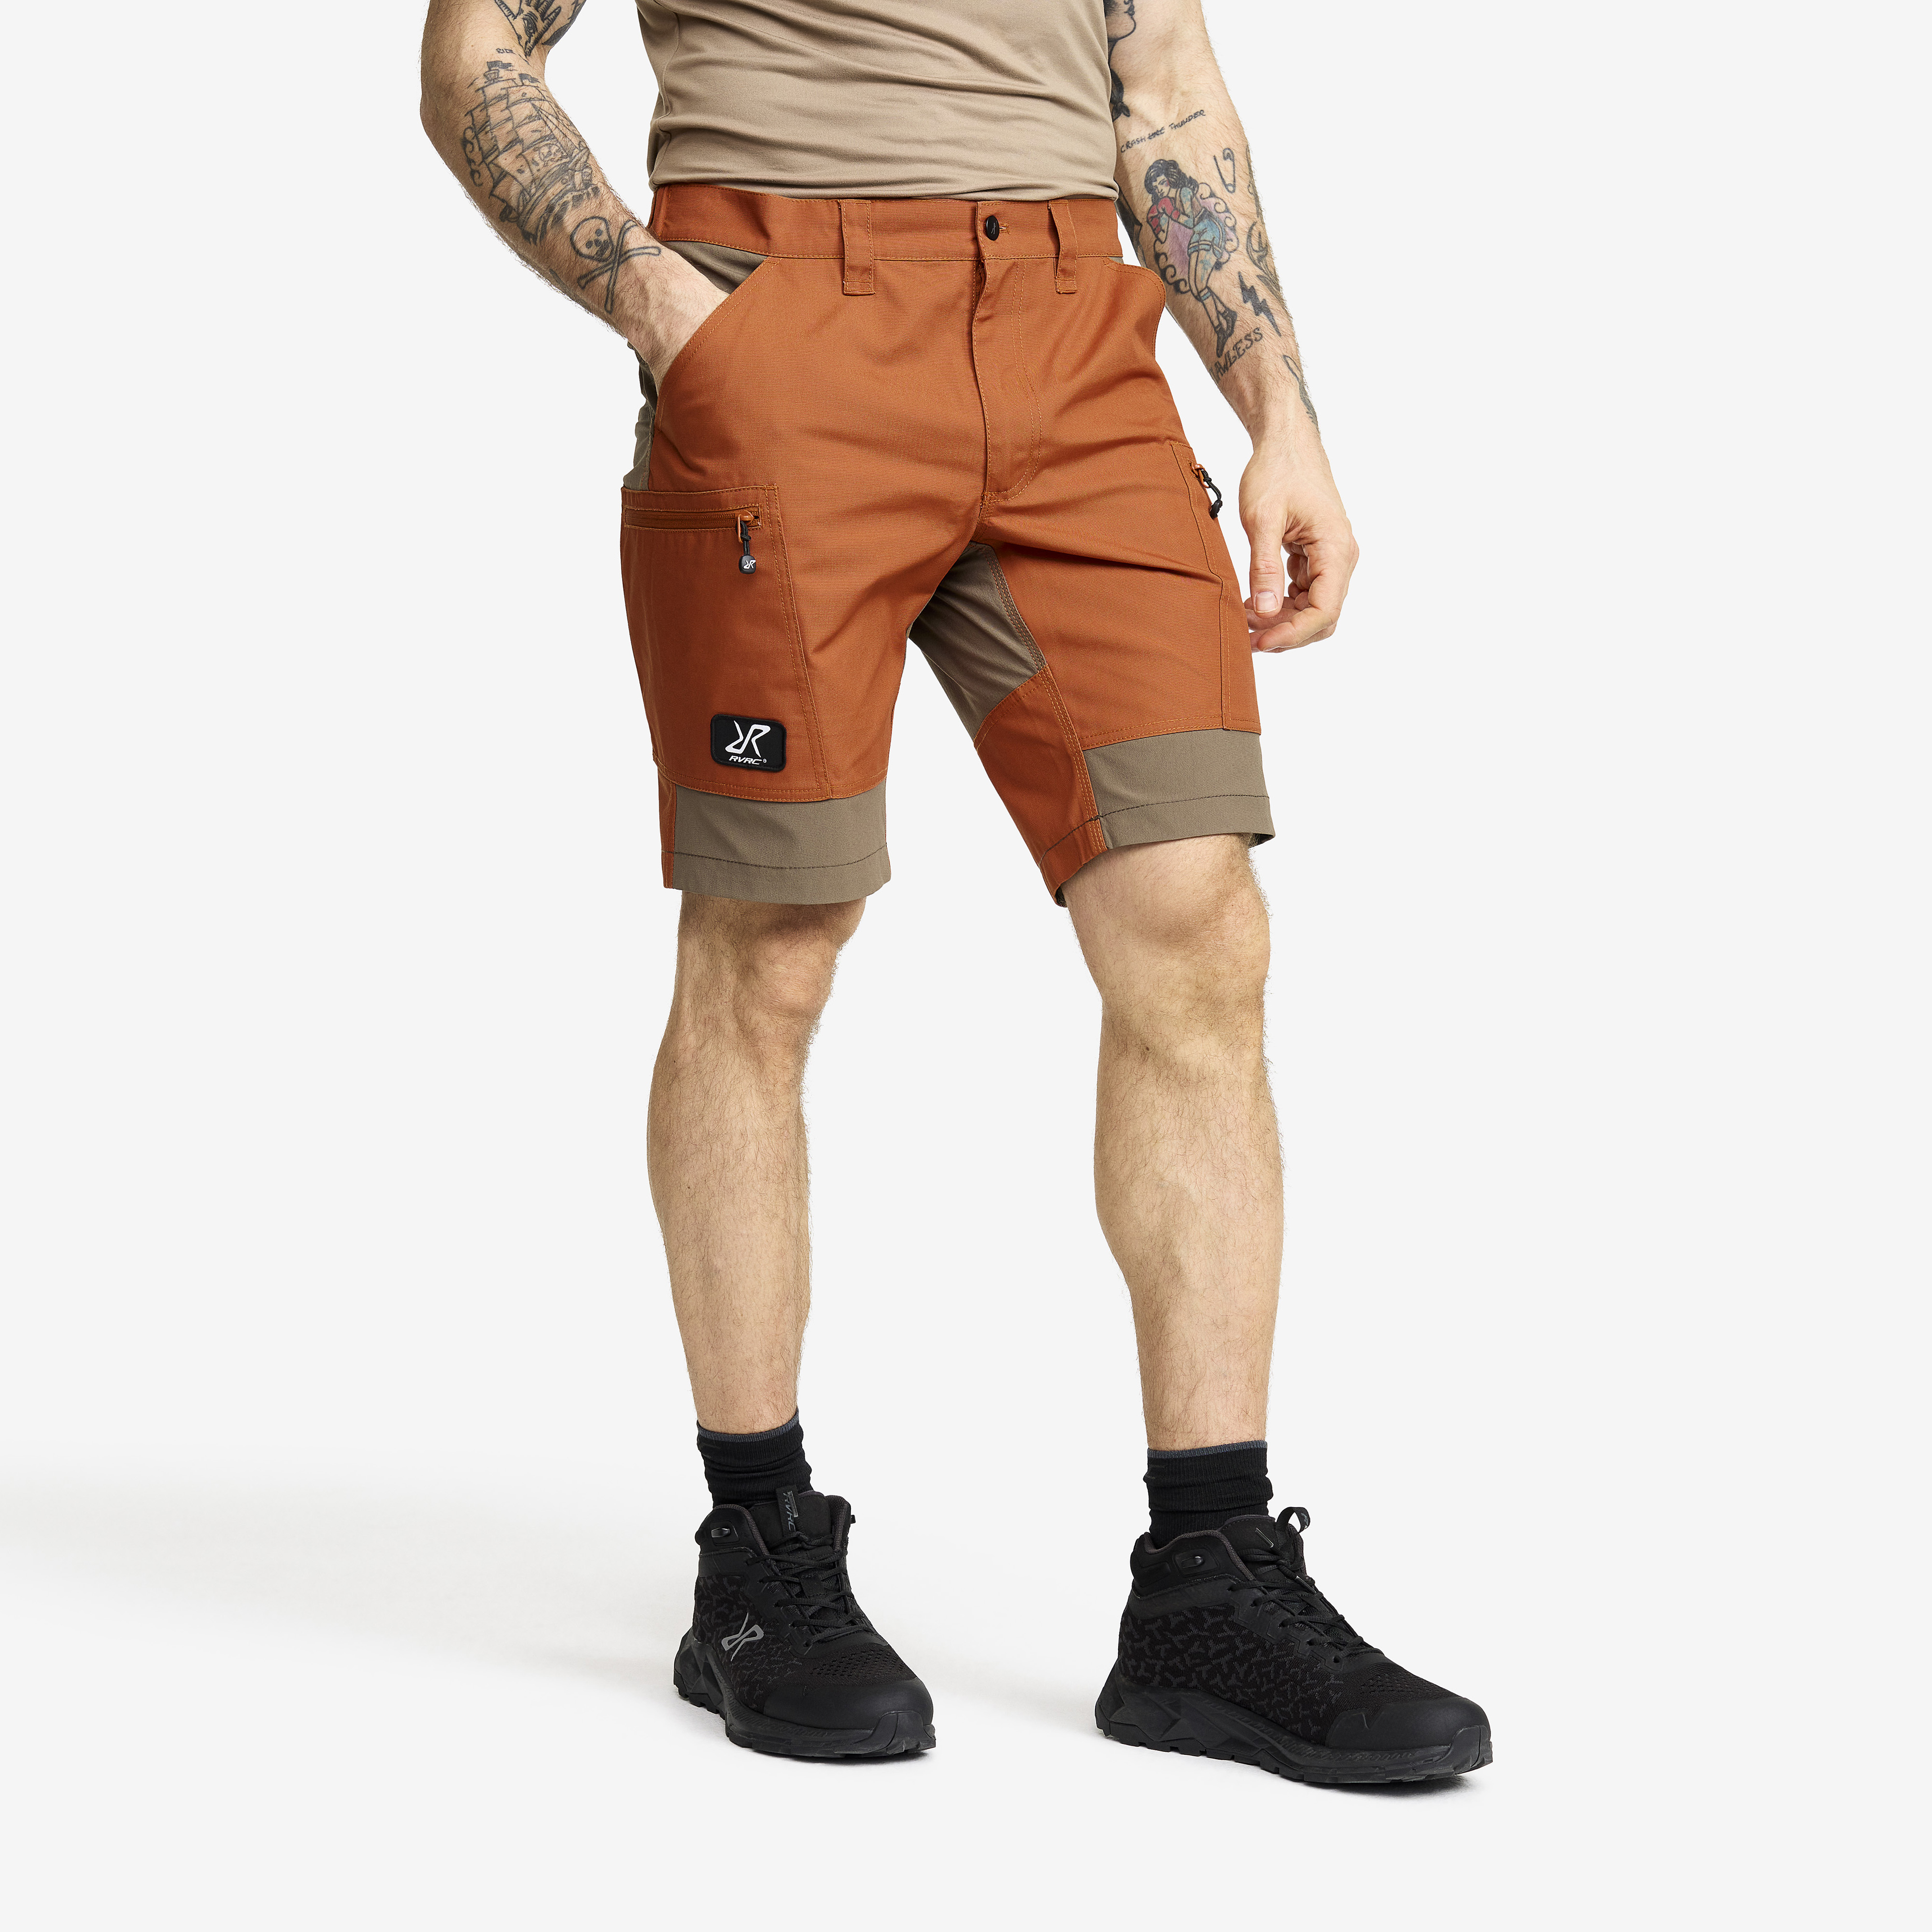 Nordwand Shorts Teracotta Brown/chocolate Chip Herre